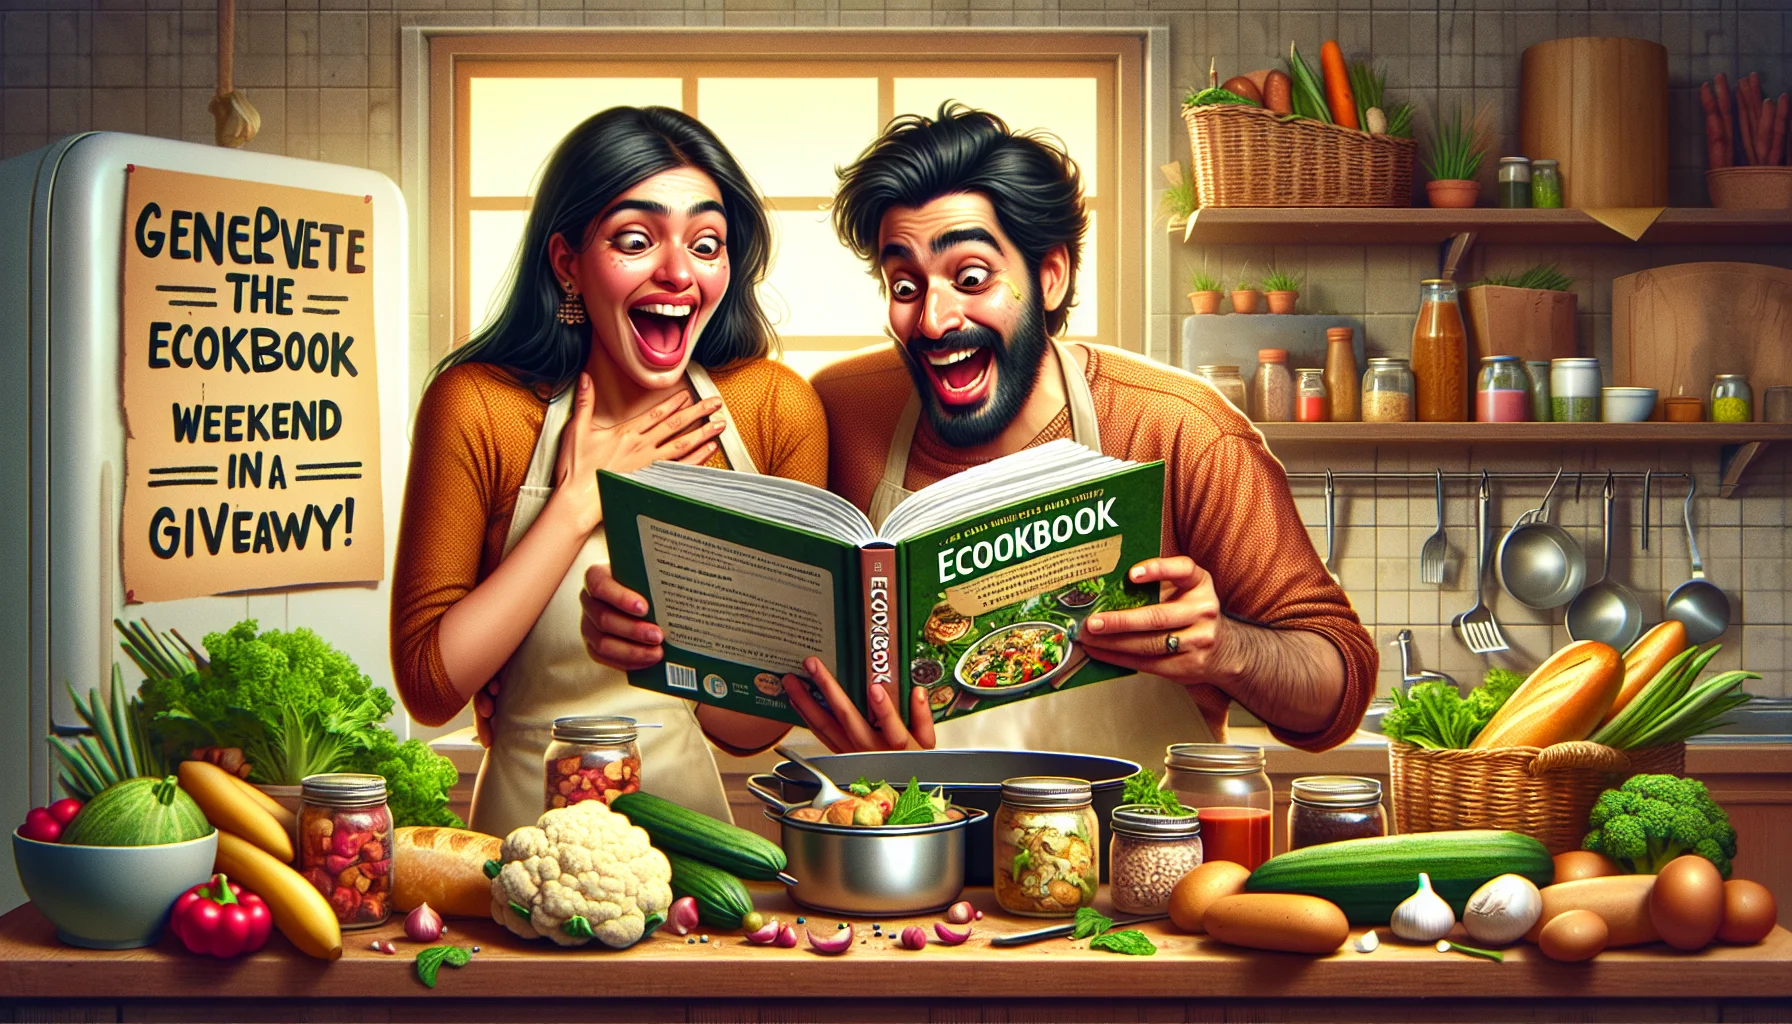 Generate a humorous and realistic scene representing an eCookbook Weekend Giveaway. The scenario shows a comical situation where a South Asian woman and a Middle Eastern man are enthusiastically reading the eCookbook in a kitchen filled with wholesome, budget-friendly ingredients. They are preparing a sumptuous, healthy meal while laughing at the amusing cooking tips provided in the eCookbook. Their expressions express delight and surprise, suggesting they've discovered the joys of eating healthy on a budget. The image should emanate a warm and welcoming vibe, encouraging people to partake in the promotion and eat healthily for less.